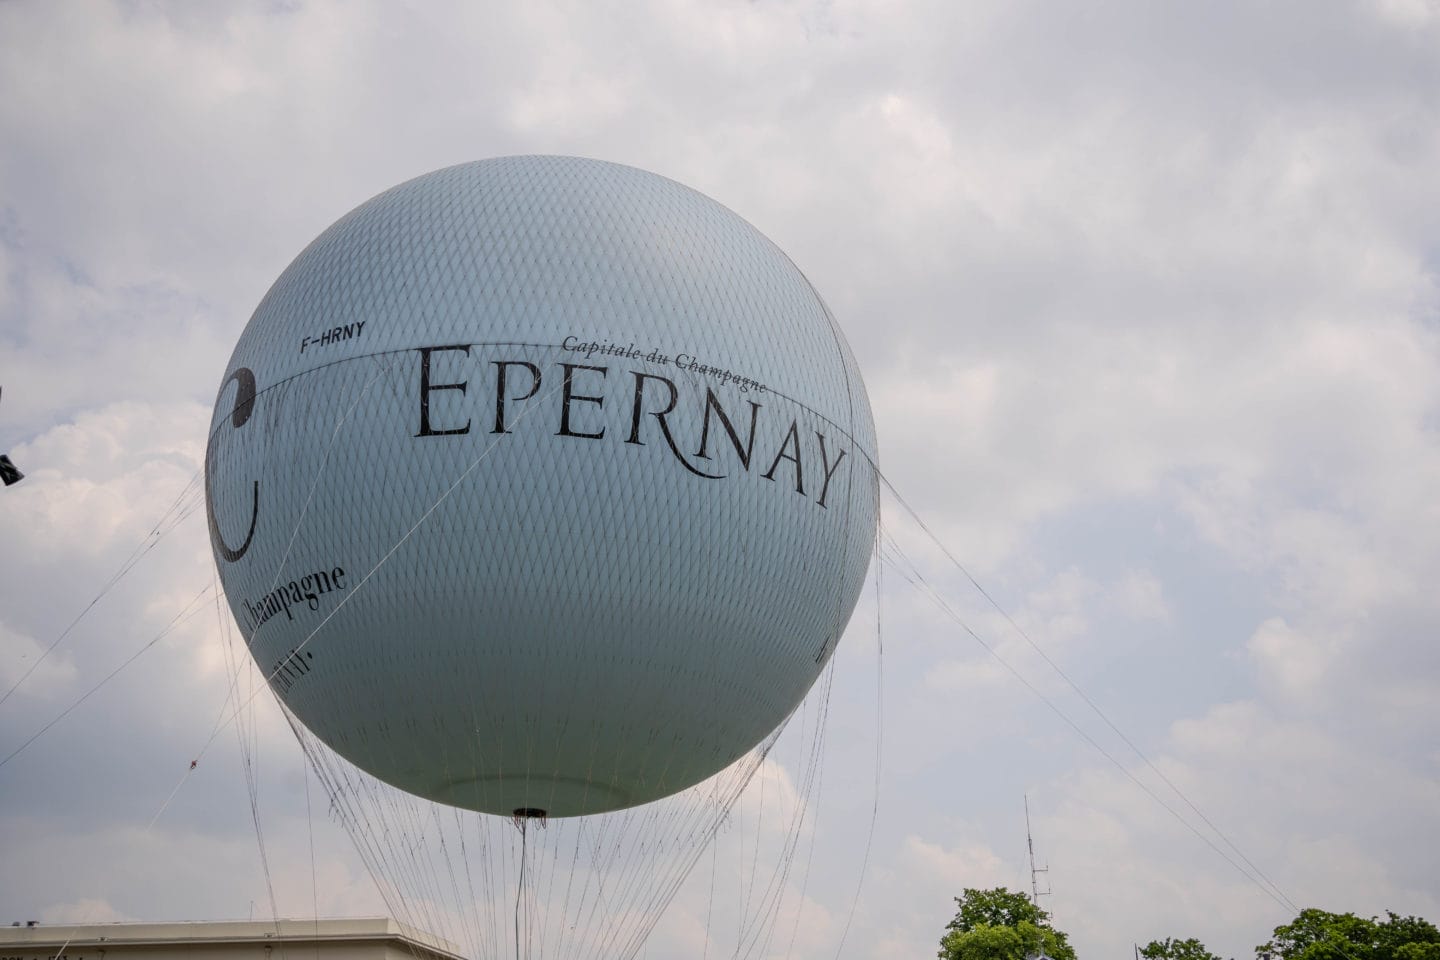 Captive Ballon in Epernay near the Avenue de Champagne in Epernay, Champagne region, France